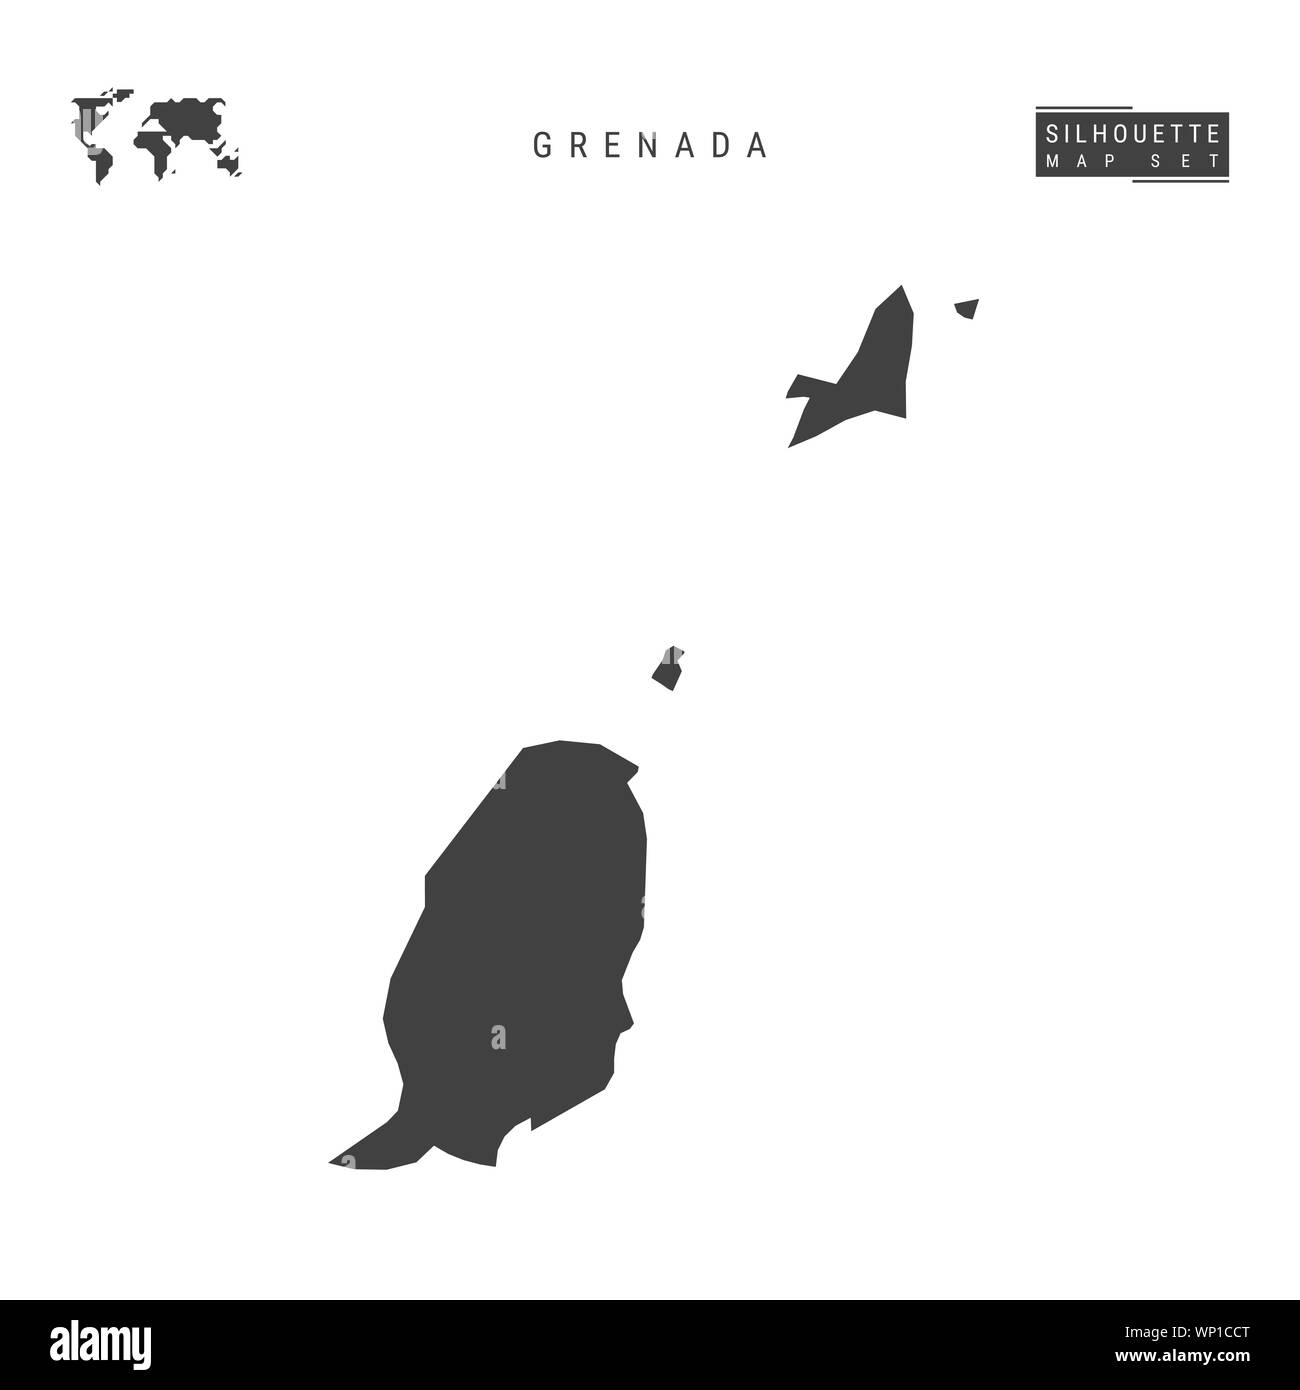 Grenada Blank Map Isolated on White Background. High-Detailed Black Silhouette Map of Grenada. Stock Photo